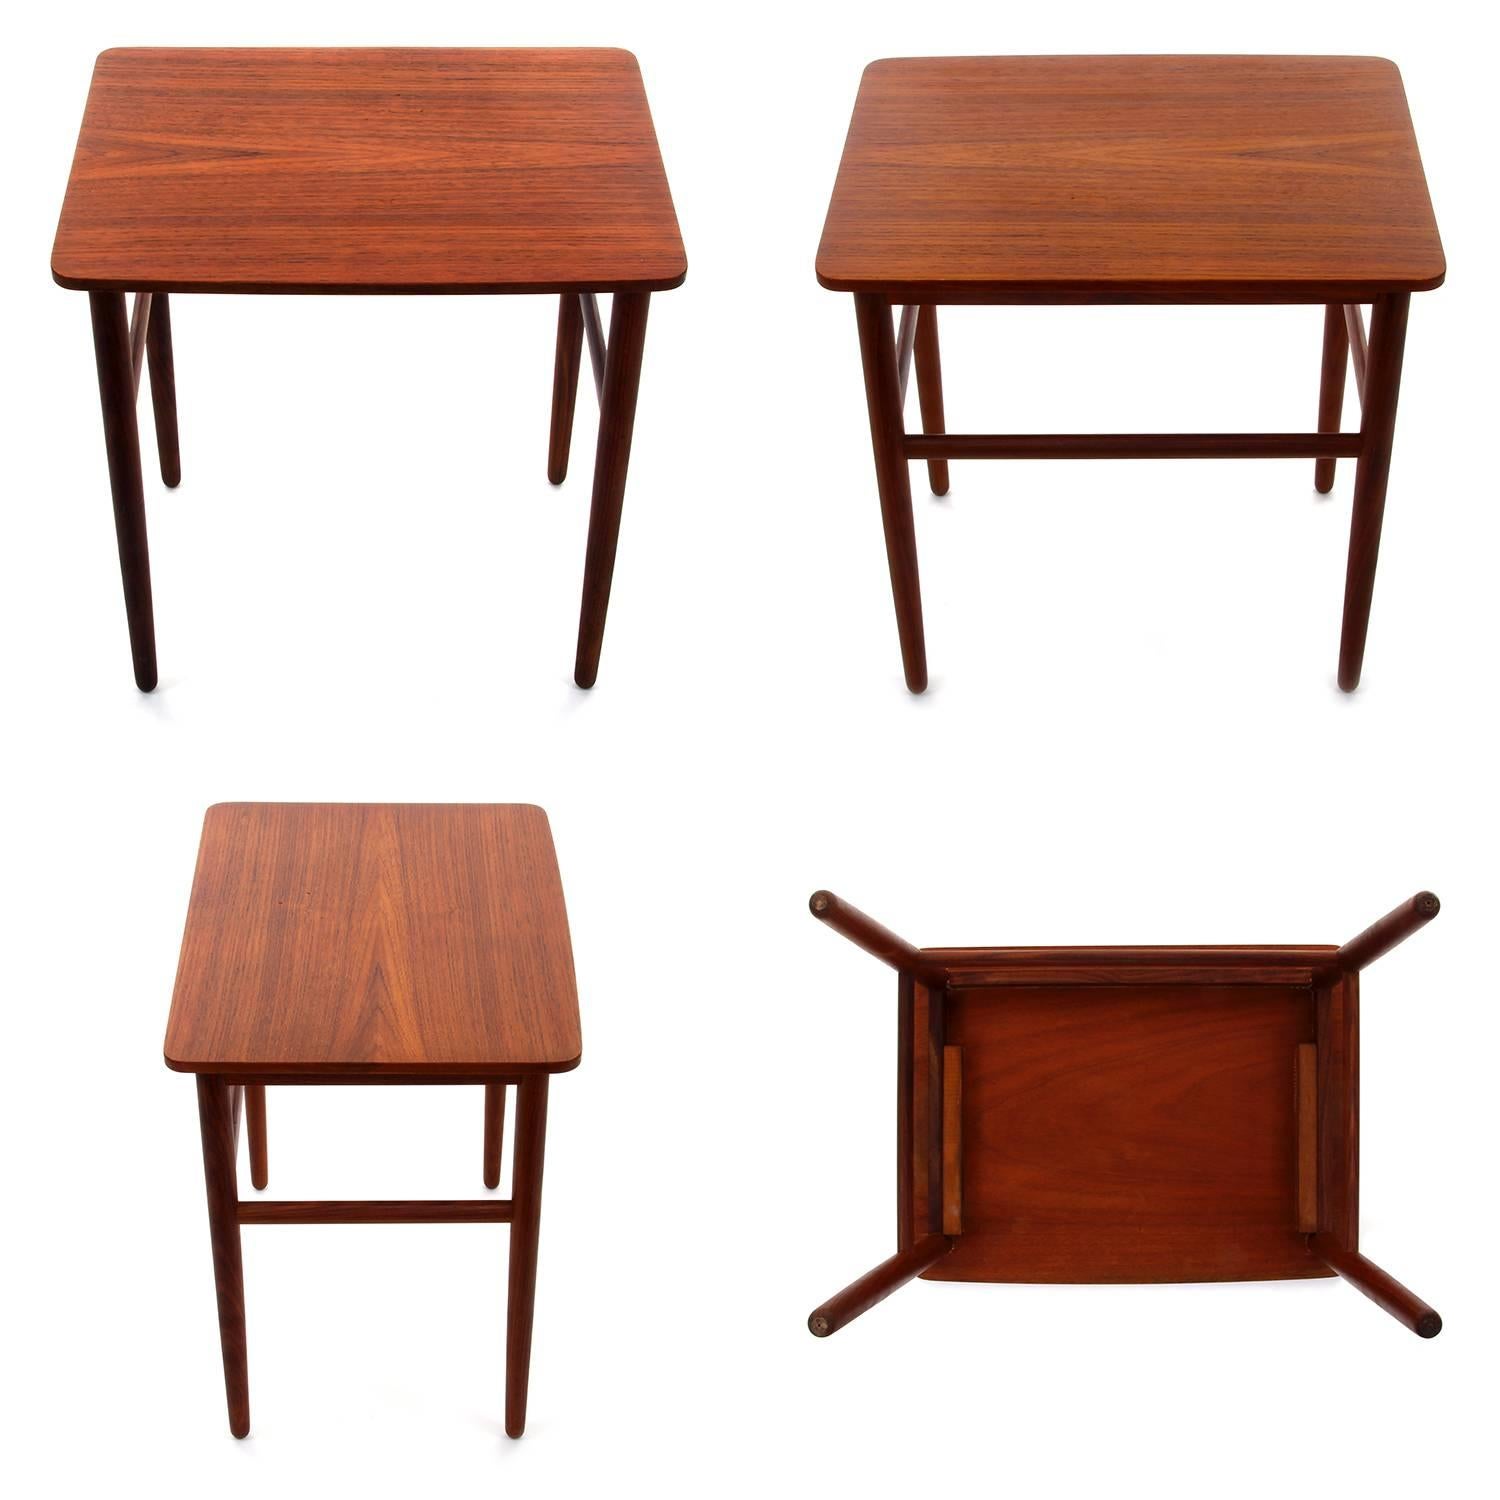 Teak and Rosewood Nesting Tables, 1950s, Danish Mid-Century Modern Nested Tables 1